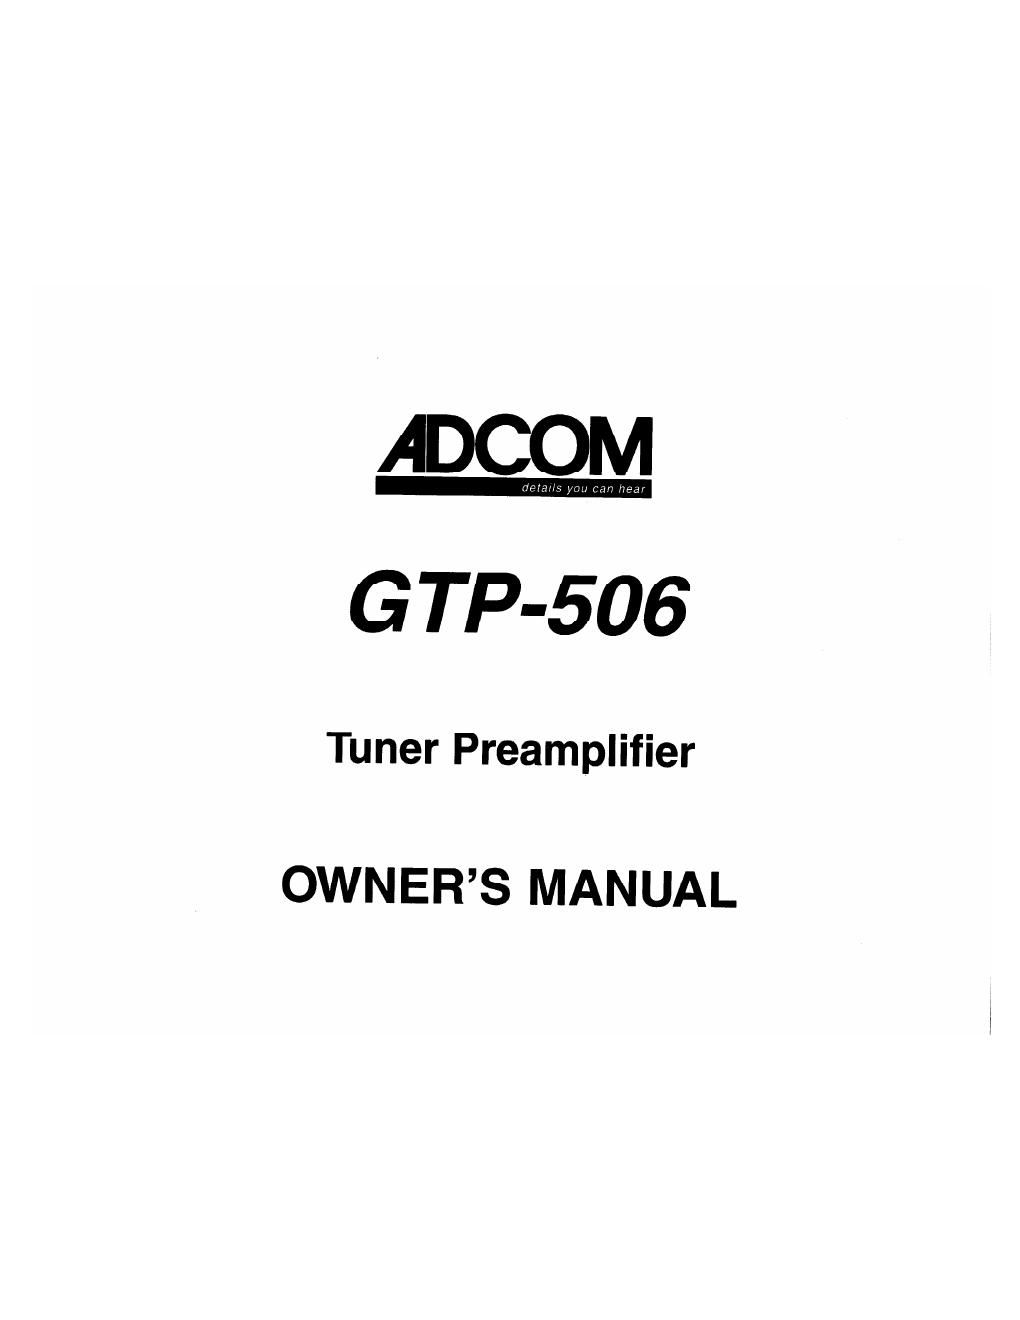 adcom gtp 506 owners manual